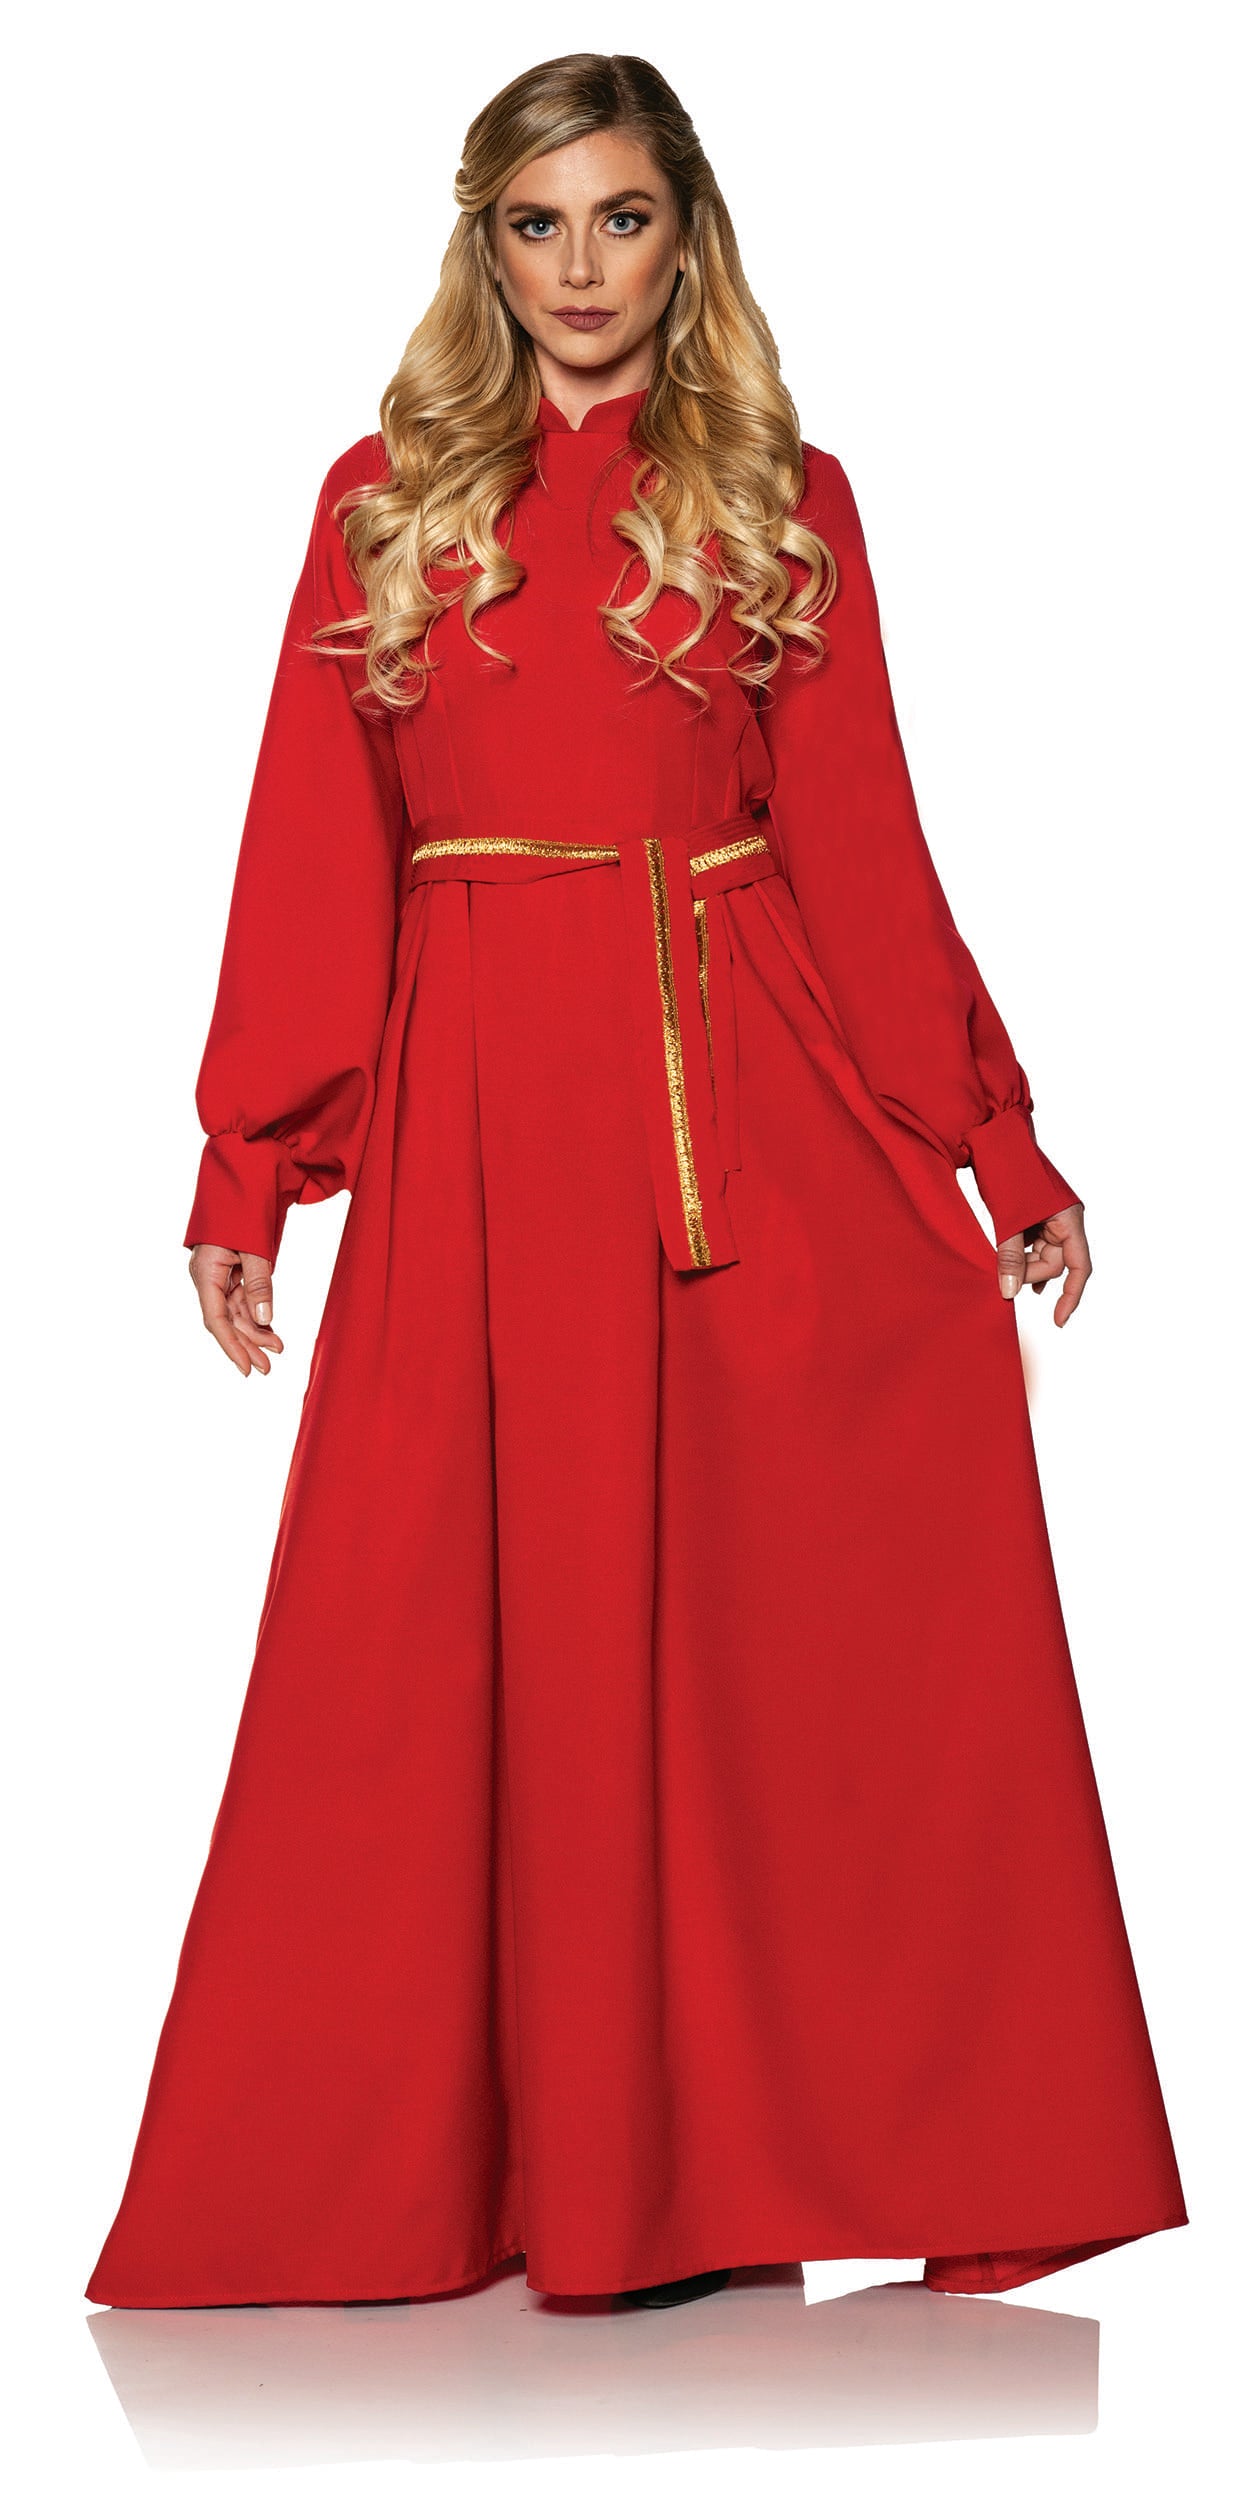 The Princess Bride Buttercup Officially Licensed Adult Costume